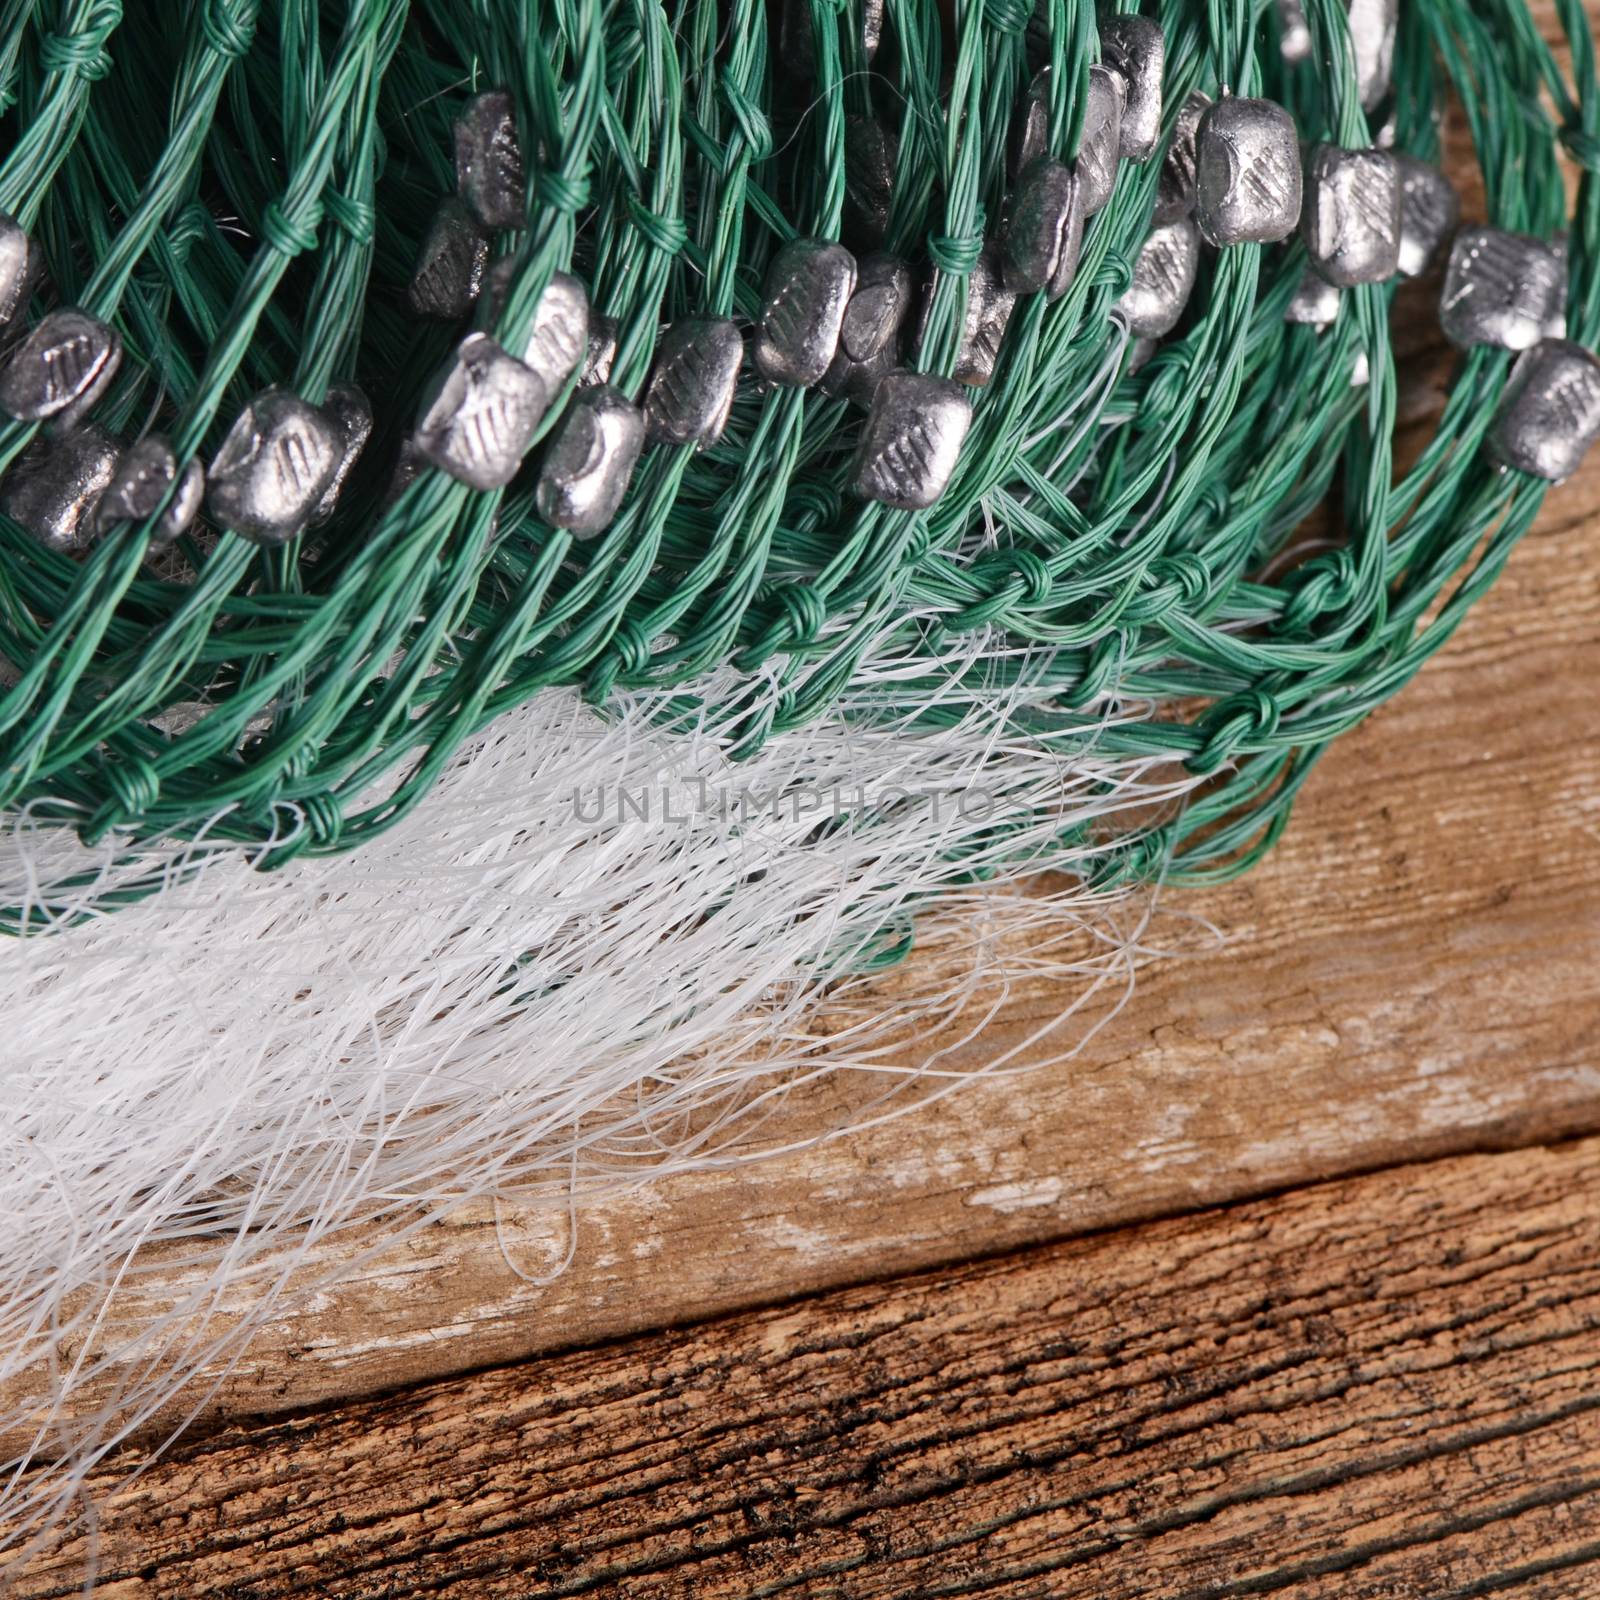 Fishing net from the fishing line close up by SvetaVo